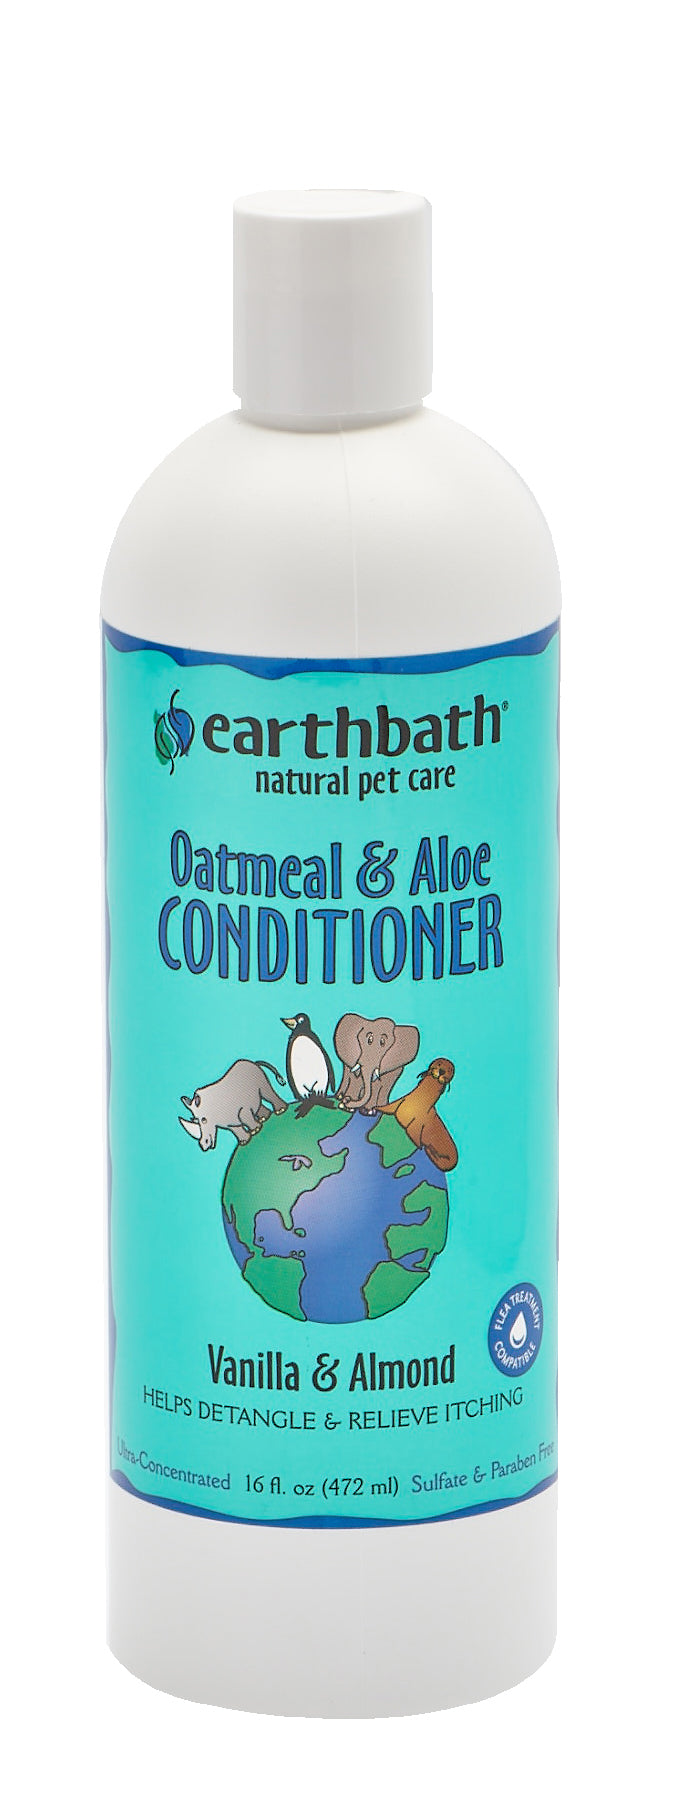 Oat Meal & Aloe Conditioner